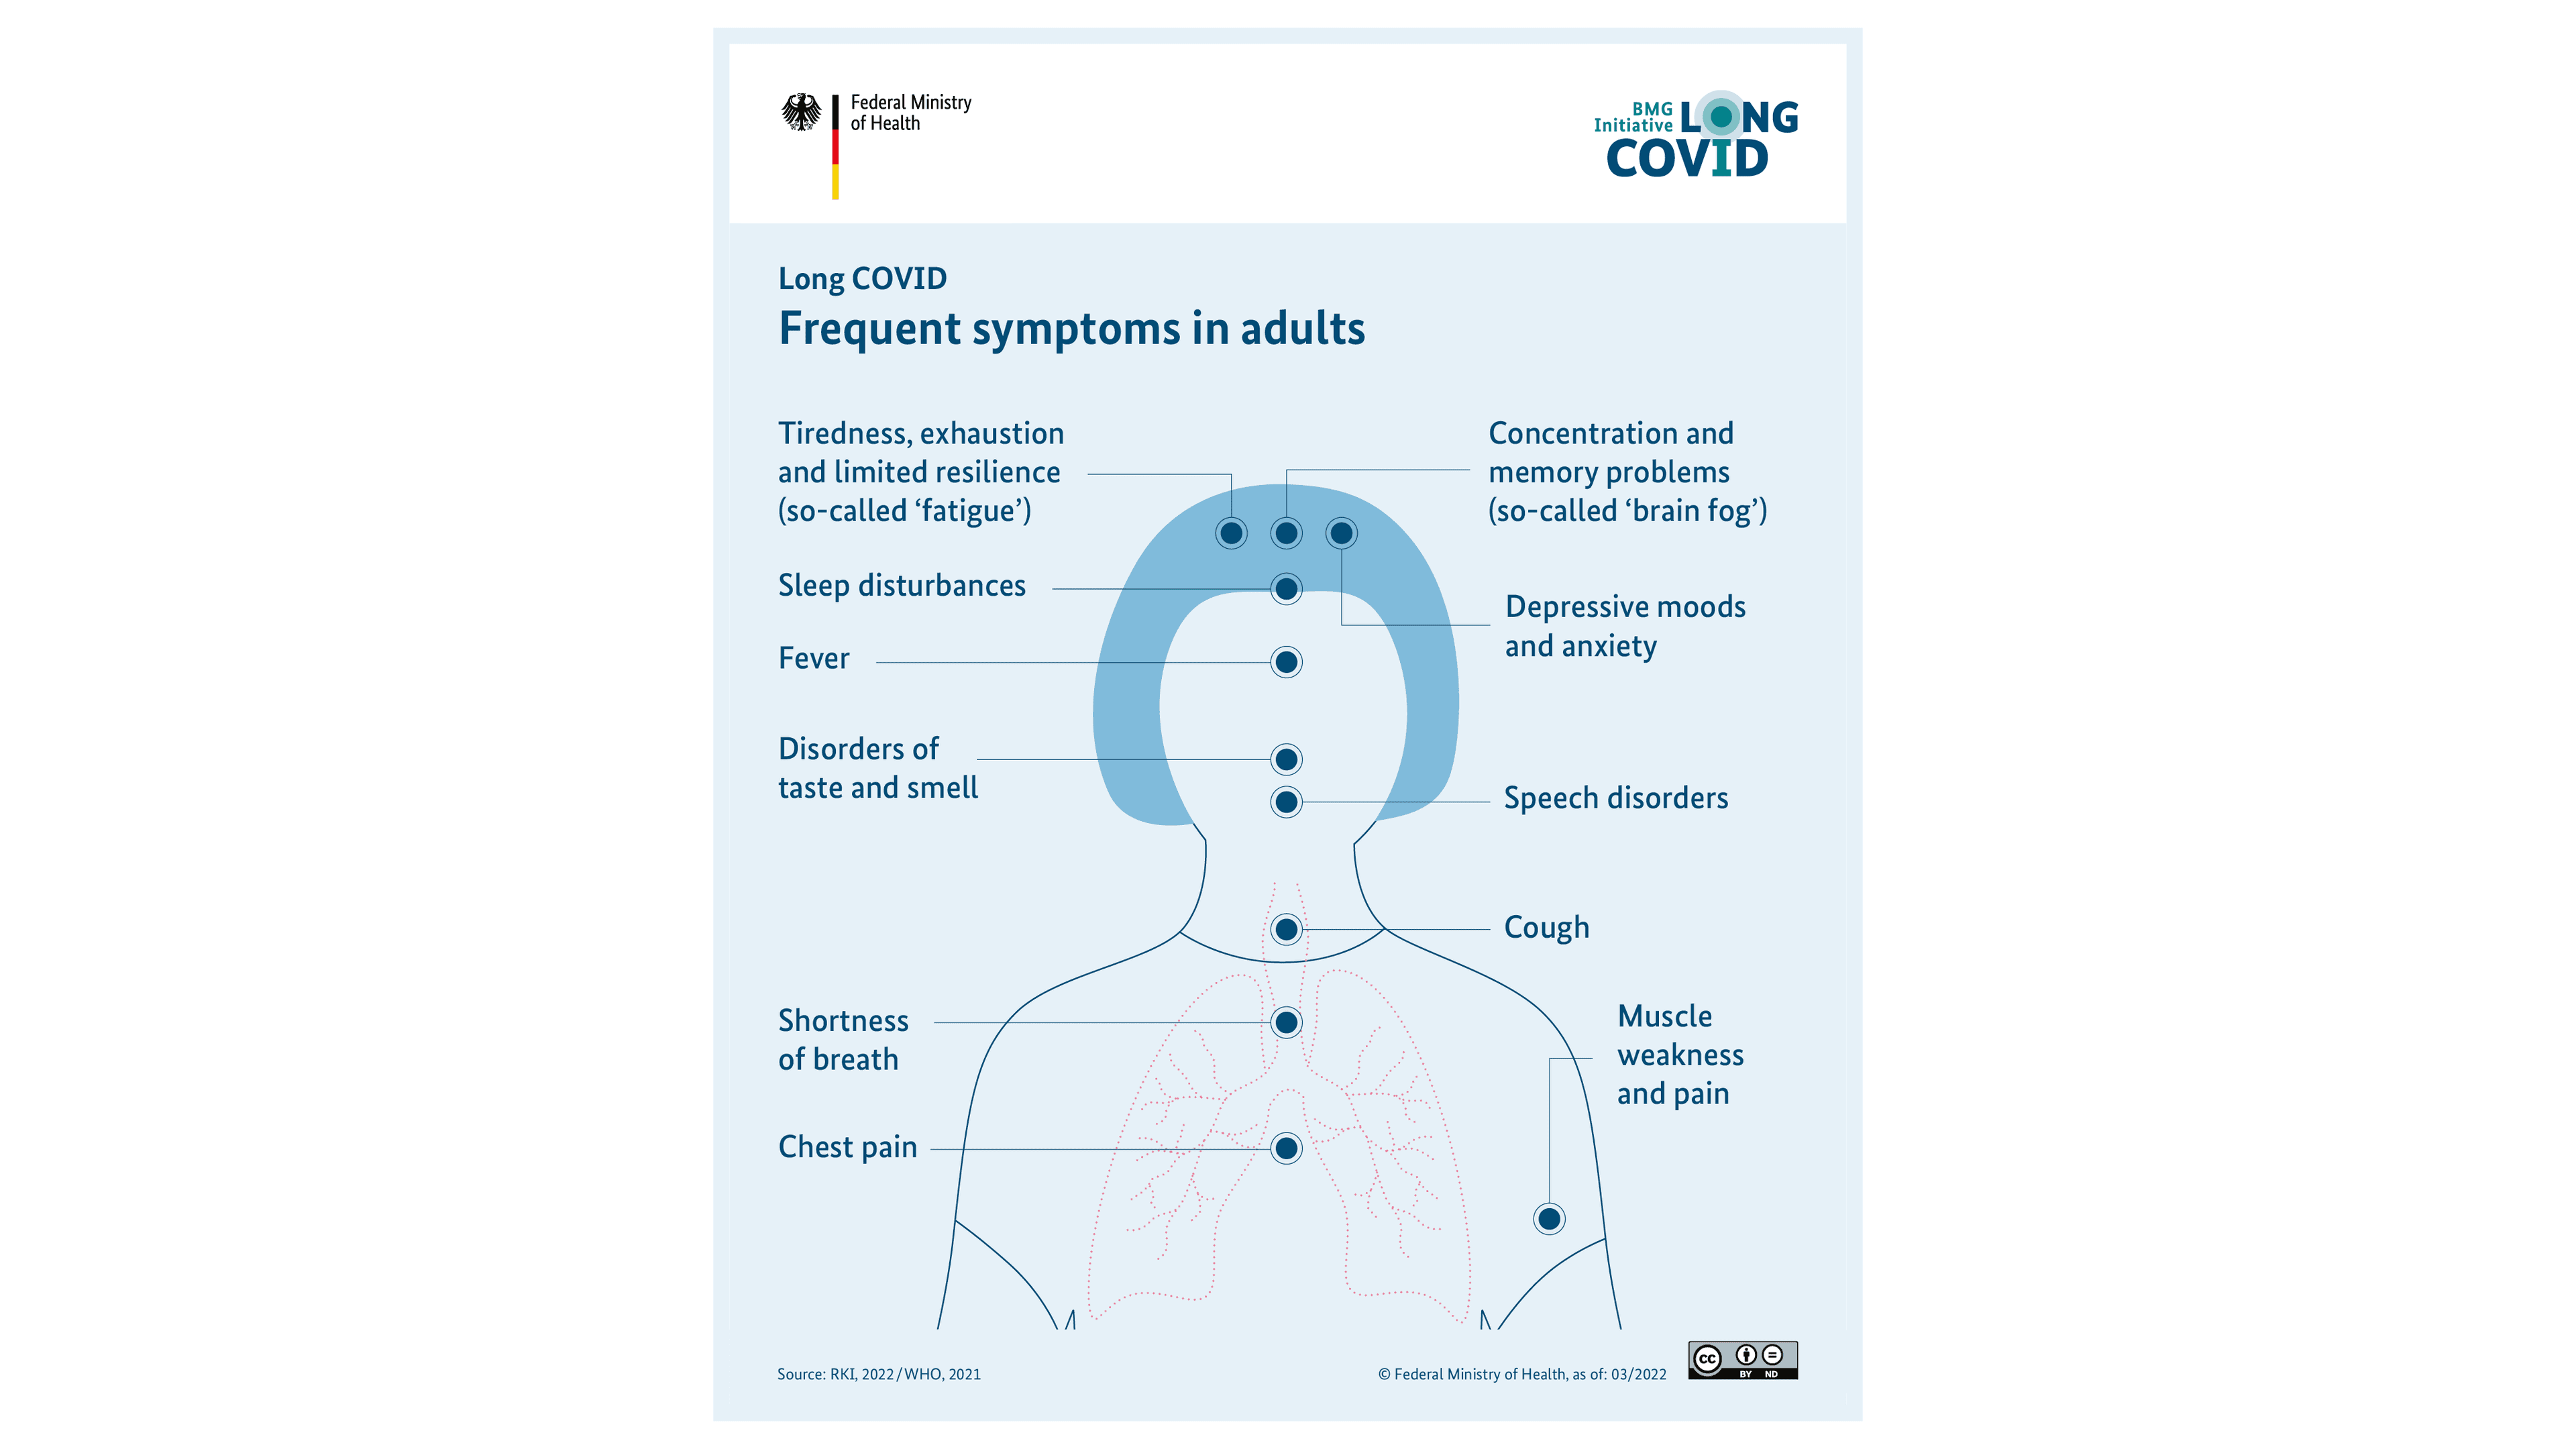 Graphic: Long COVID - Frequent symptoms in adults